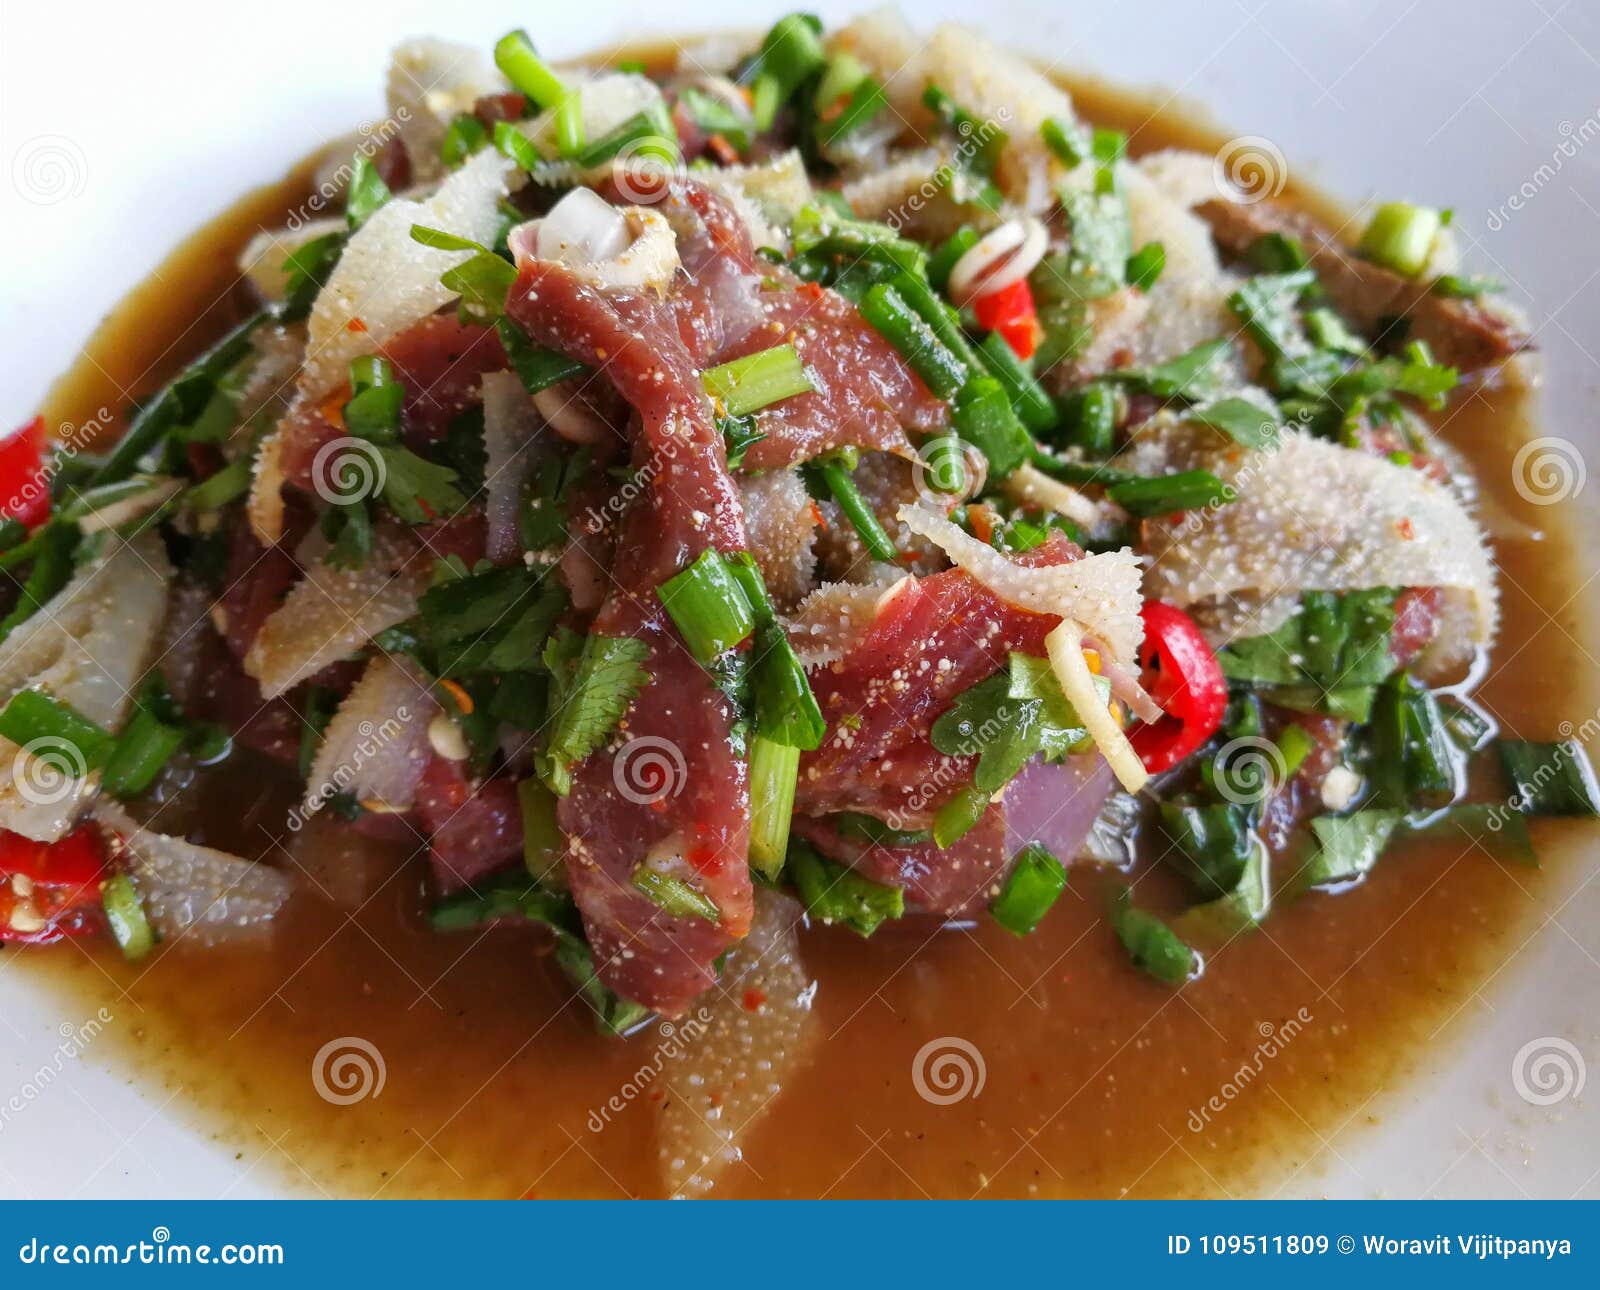 Raw Spicy Thai Minced Beef Salad Stock Image Image Of Pork Oriental 109511809